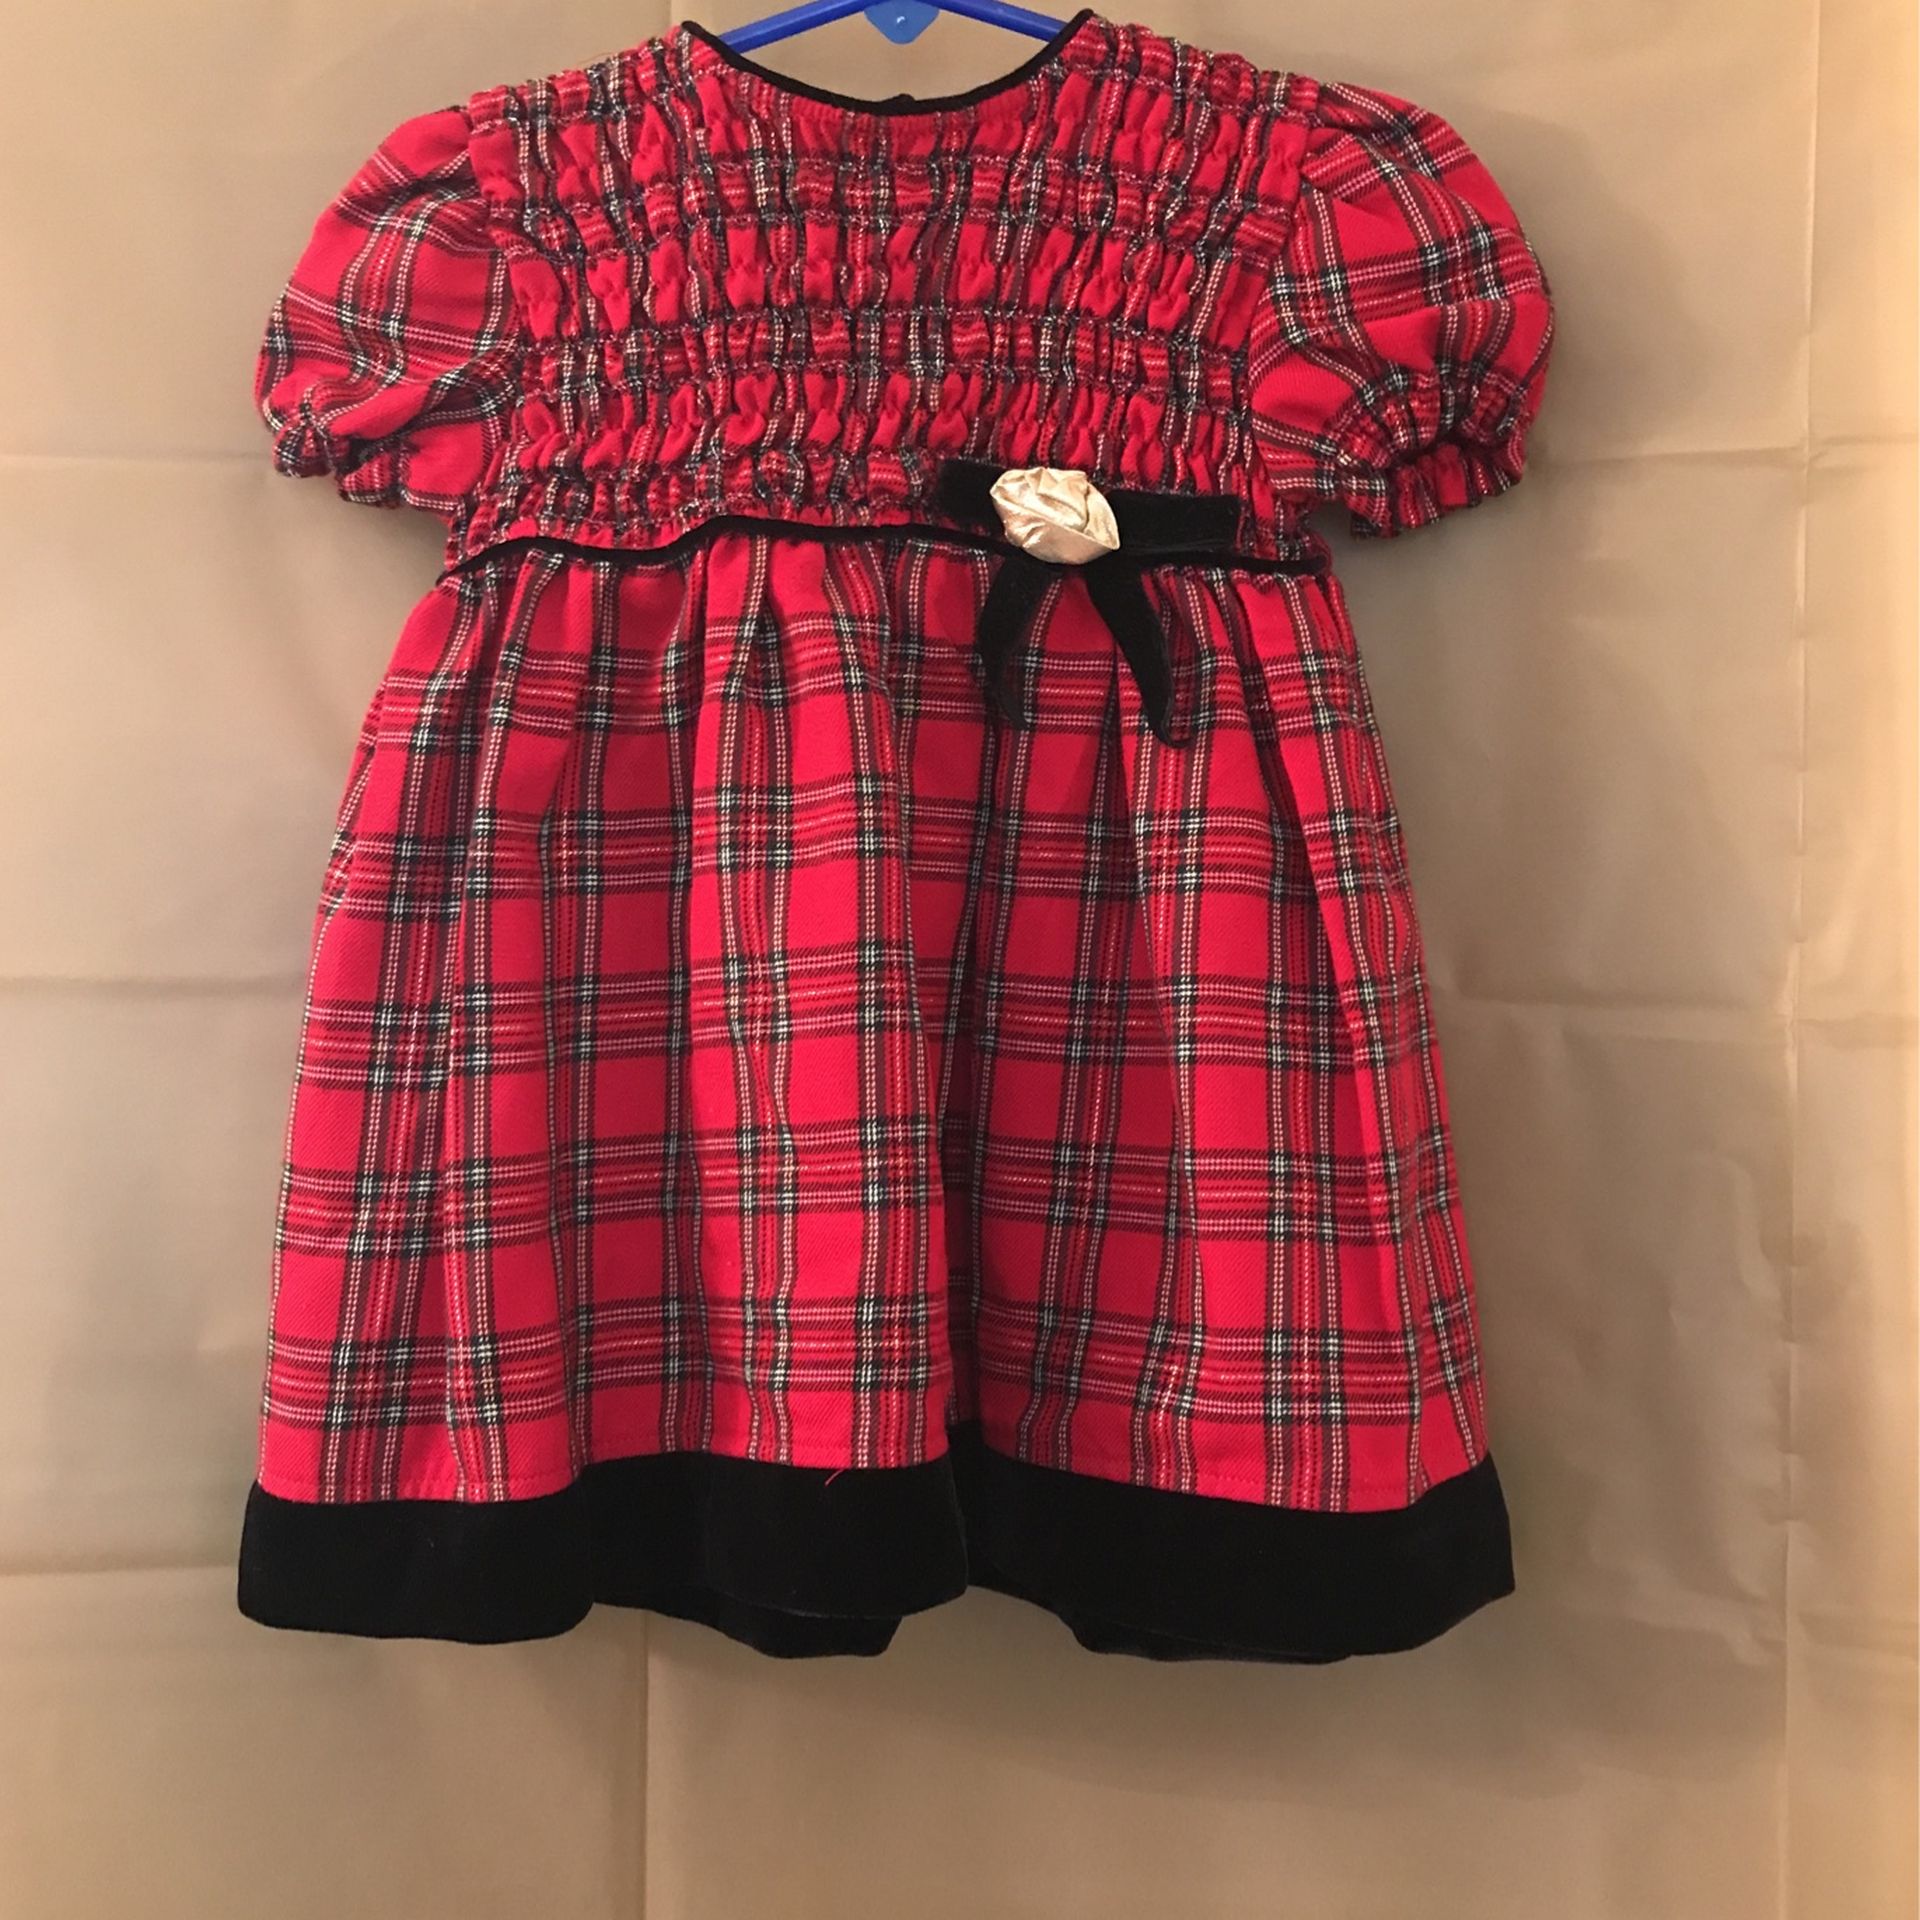 Rose Cottage Holiday Dress Red, Green, Black And Gold Size 24 Months 